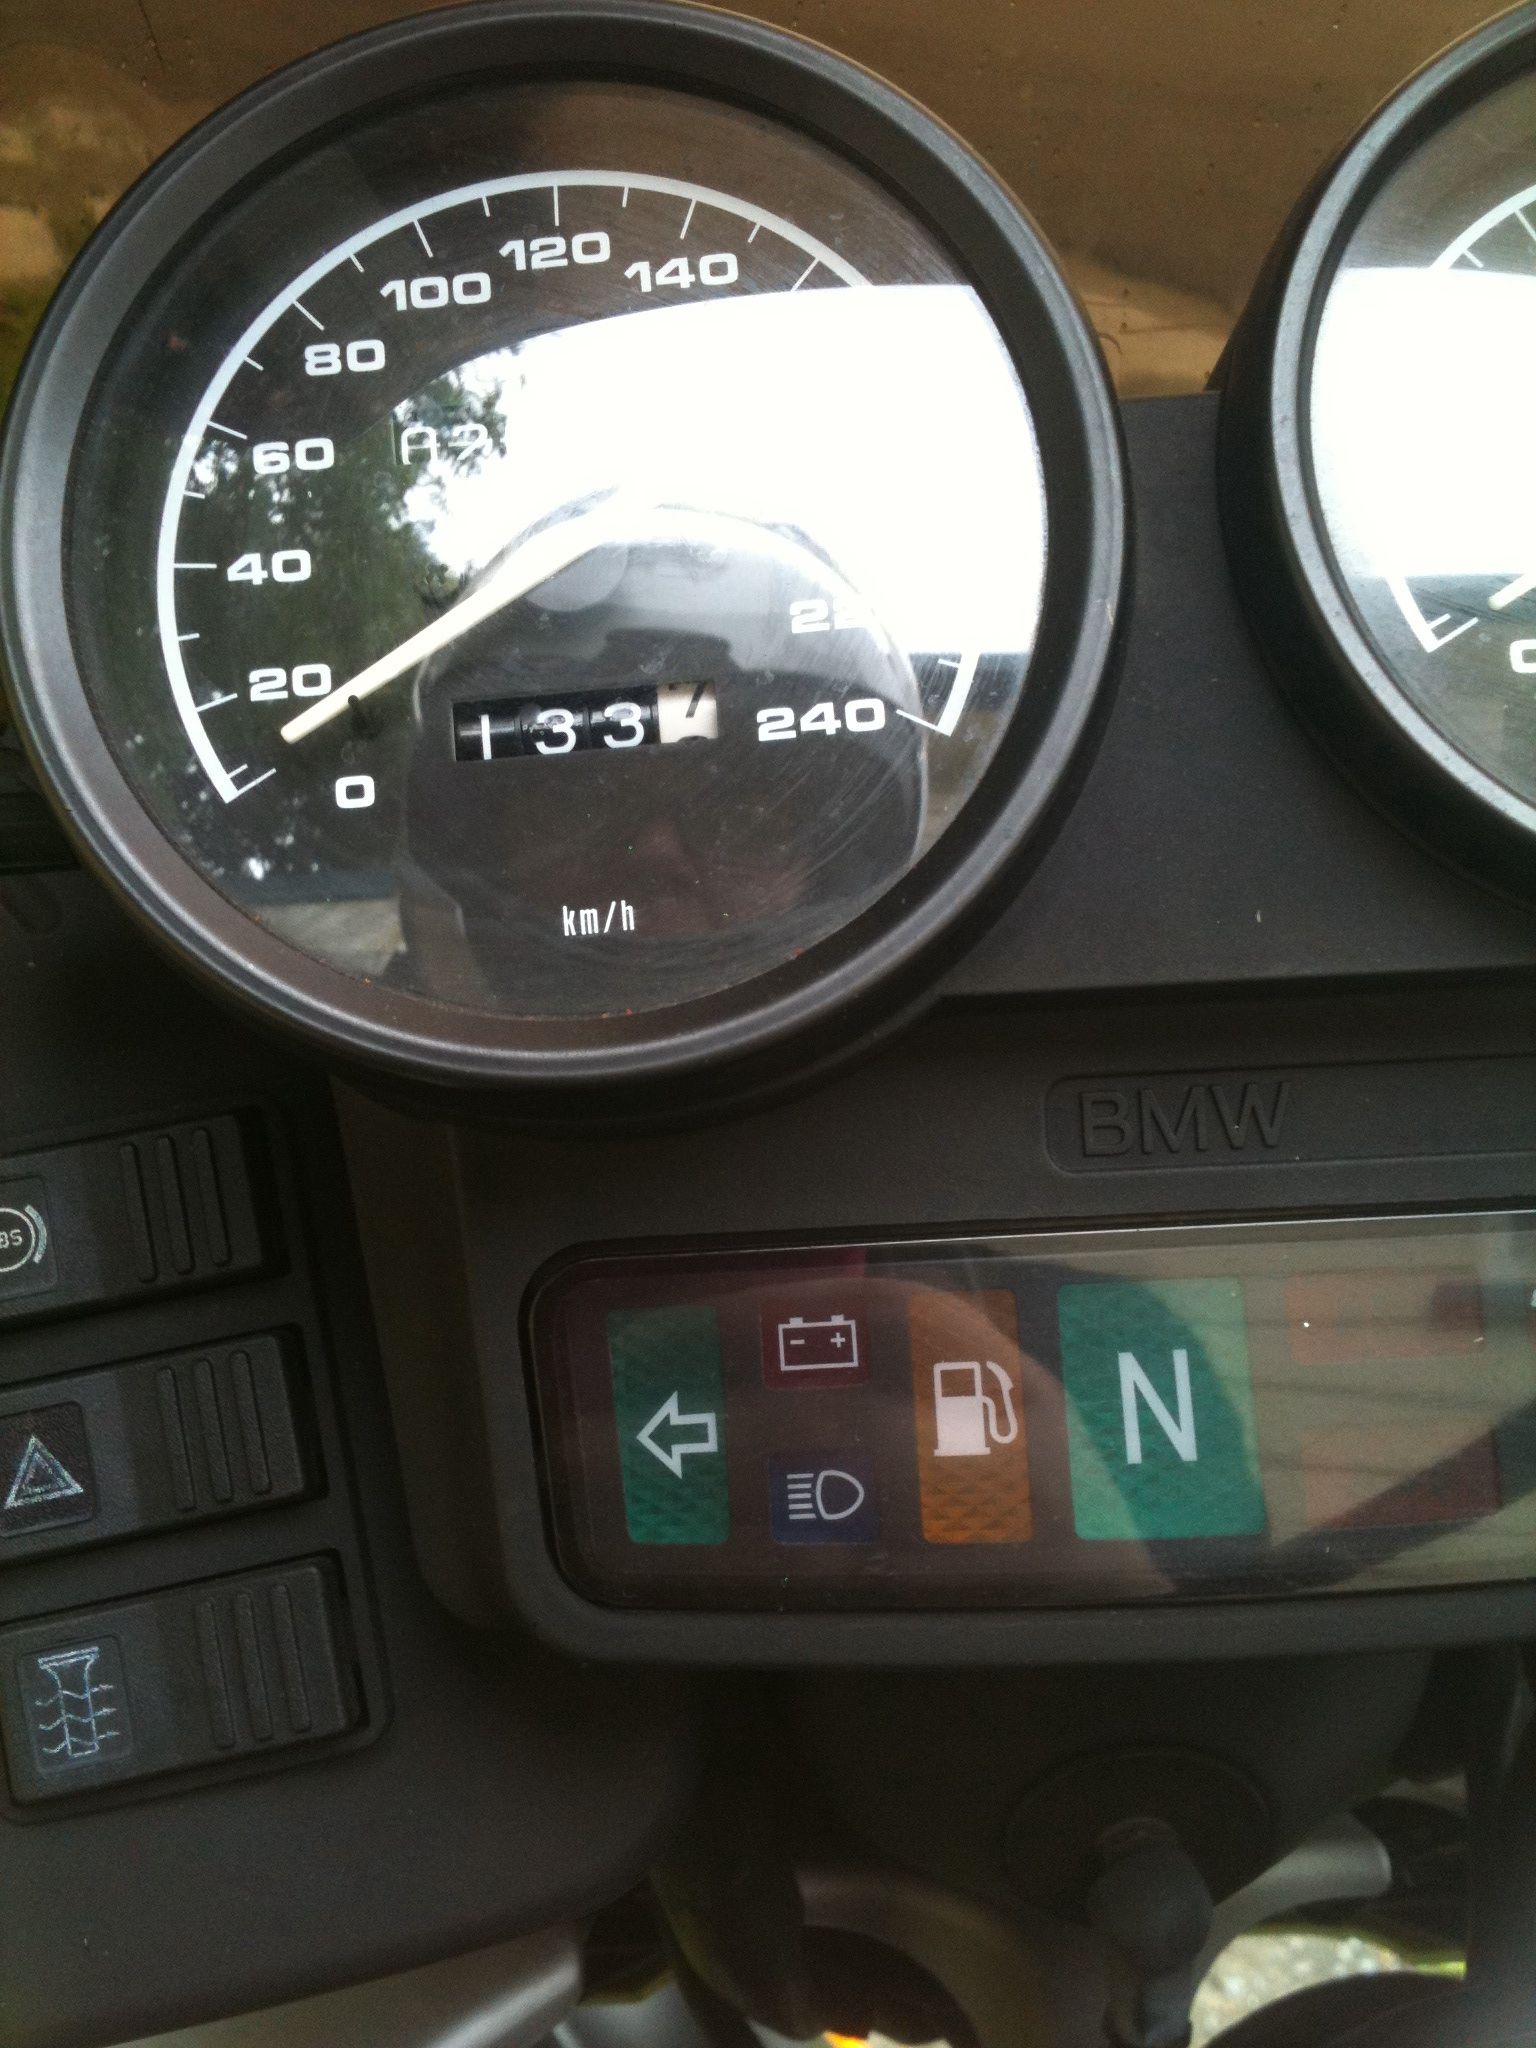 two dashboard gauges are shown in this vehicle